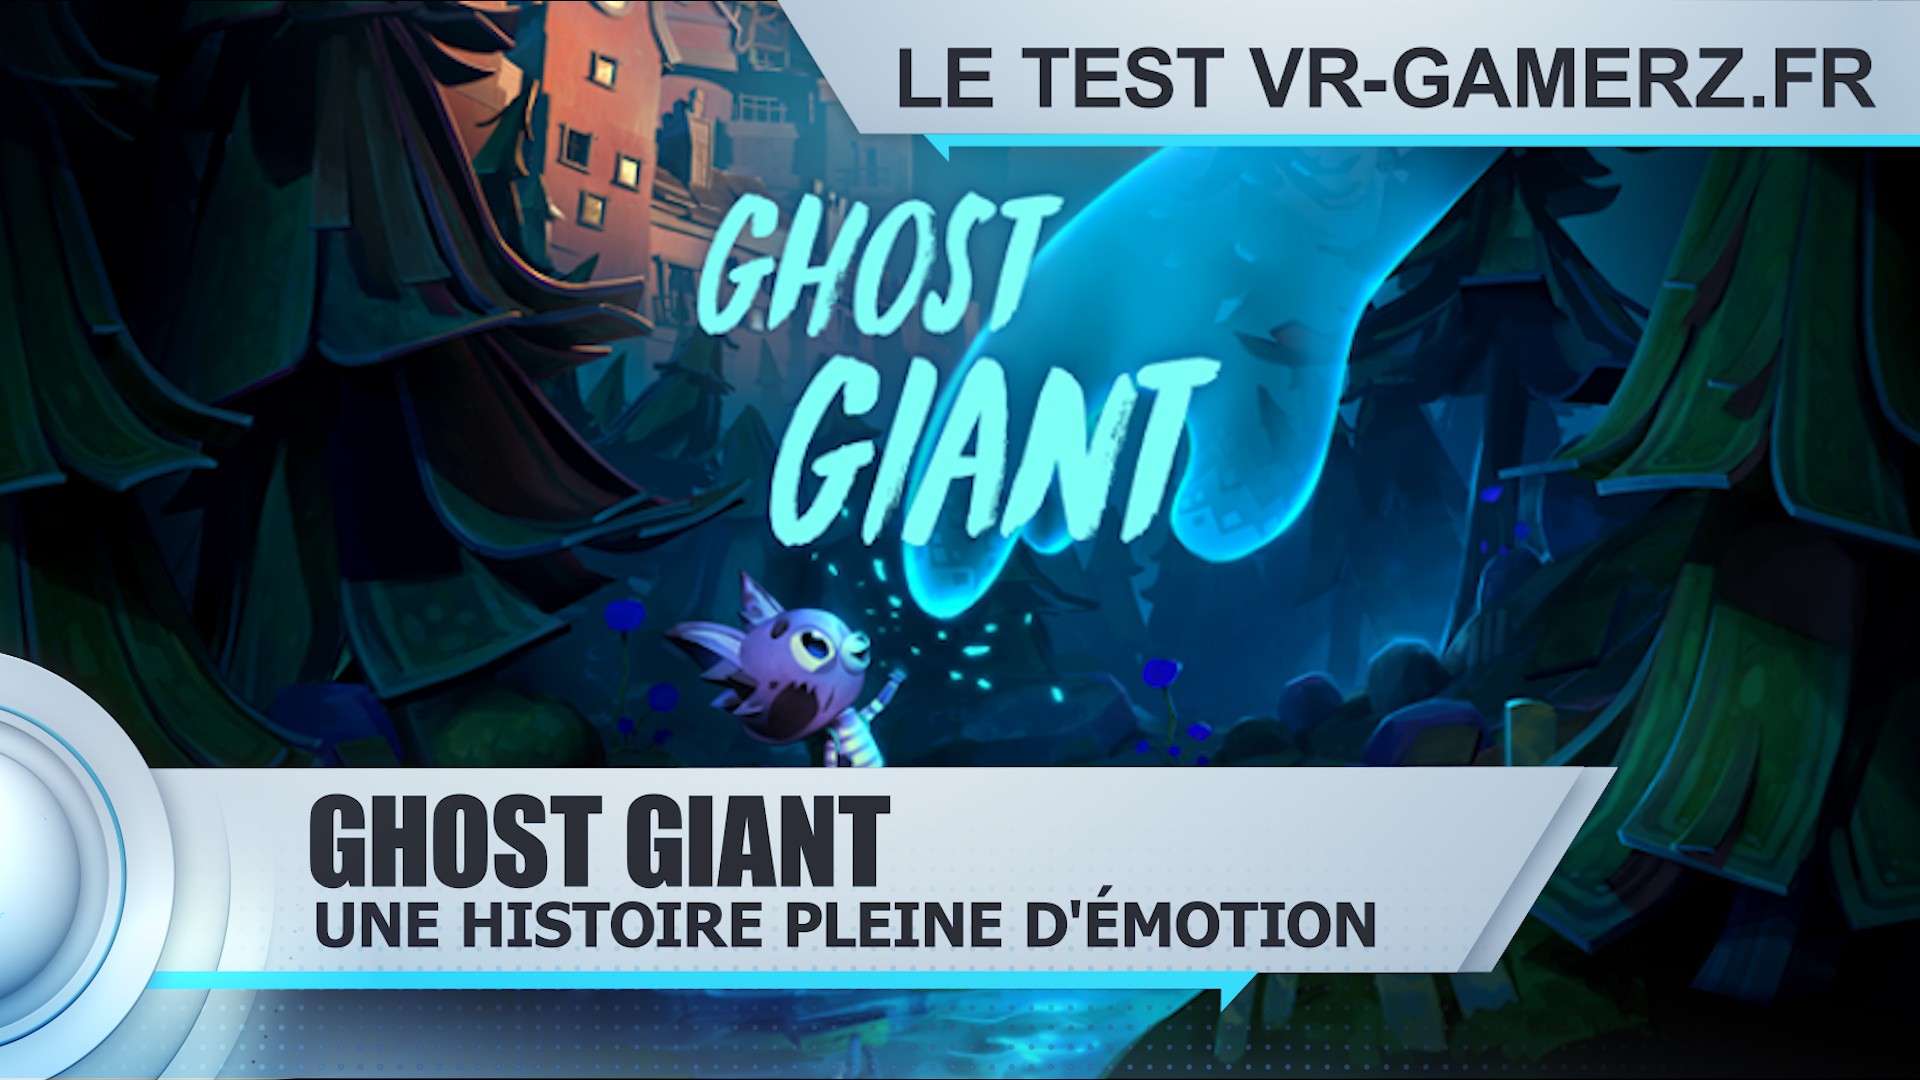 ghost giant quest